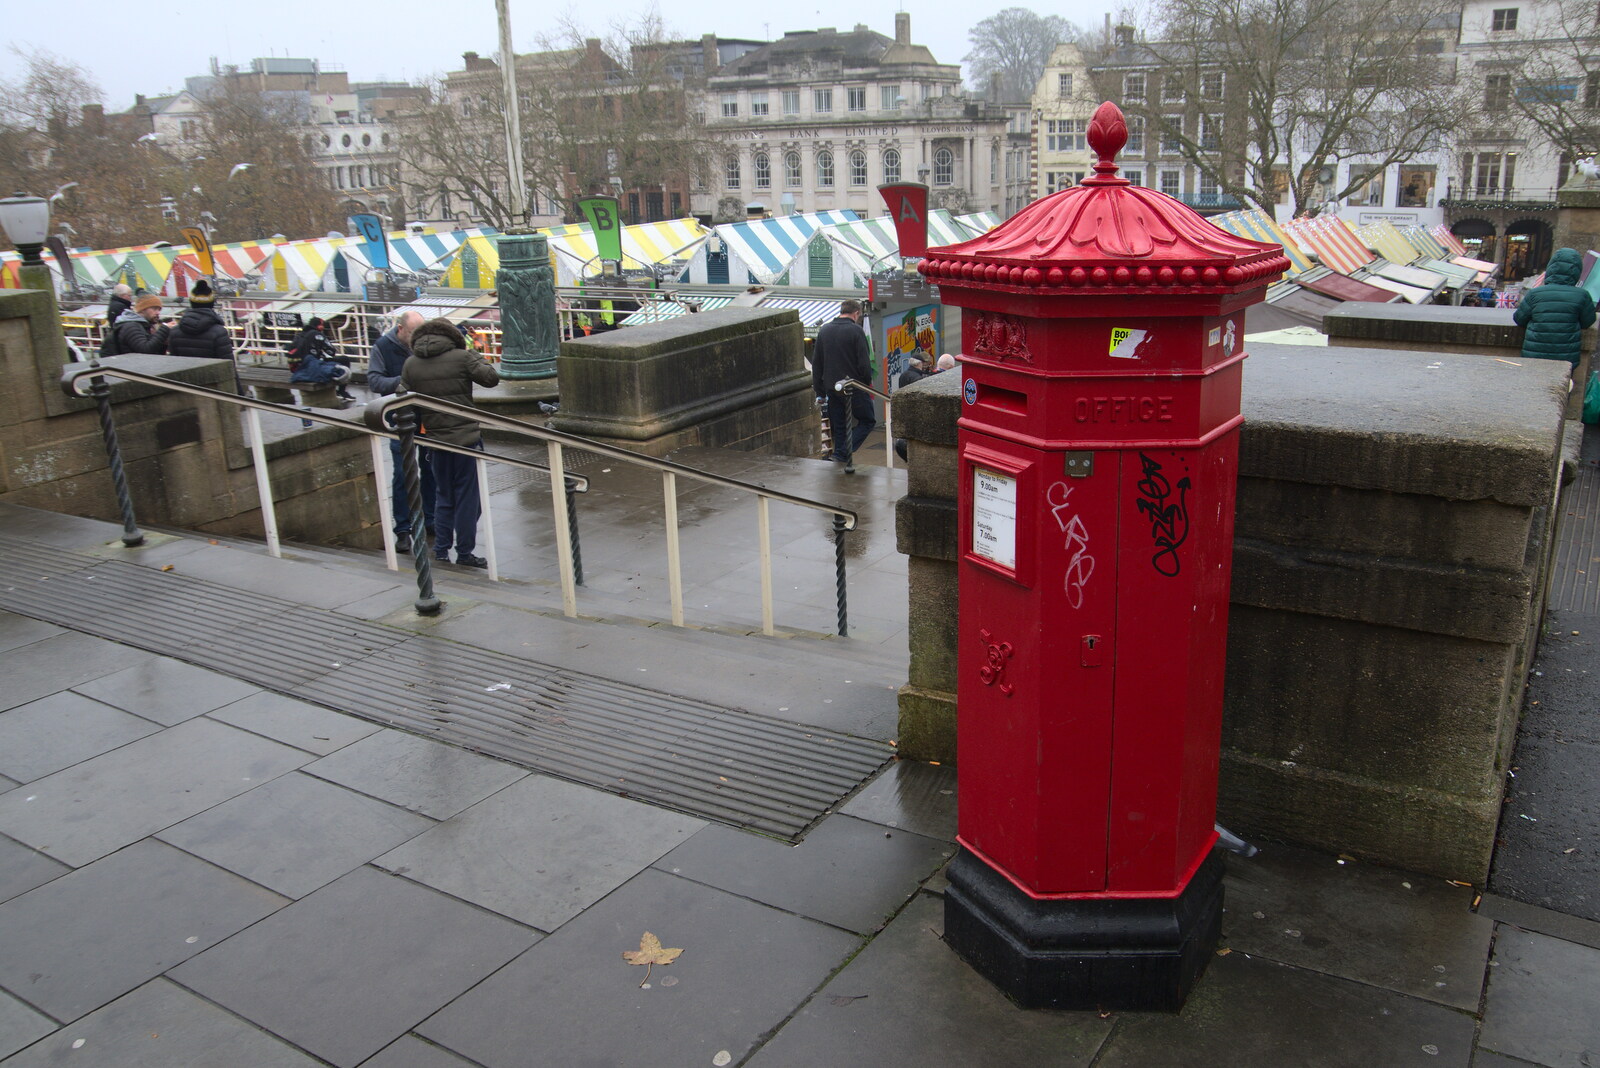 A replica Penfold mailbox on St Peter's Street from Scooters and a Bit of Christmas Shopping, Eye and Norwich, Norfolk - 23rd December 2021